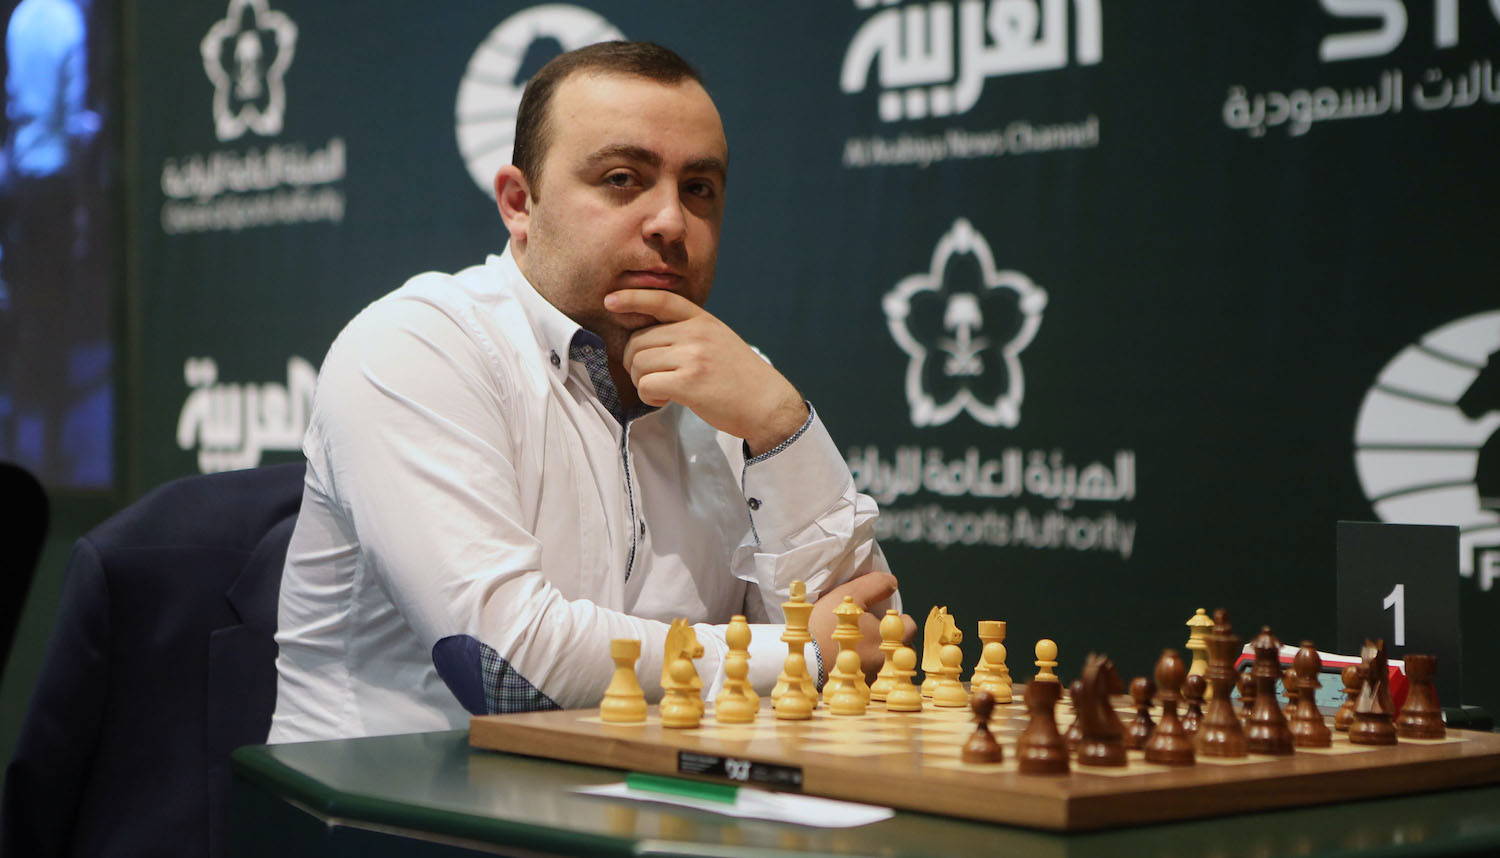 Petrosian, Tigran L. waits to compete wit Clarsen, Magnus on the Day 6 of the King Salman Rapid &amp; Blitz Chess Championships on December 30, 2017 in Riyadh, Saudi Arabia. The Championship is taking place in Saudi Arabia for the first time with participation of 236 players from 70 countries.